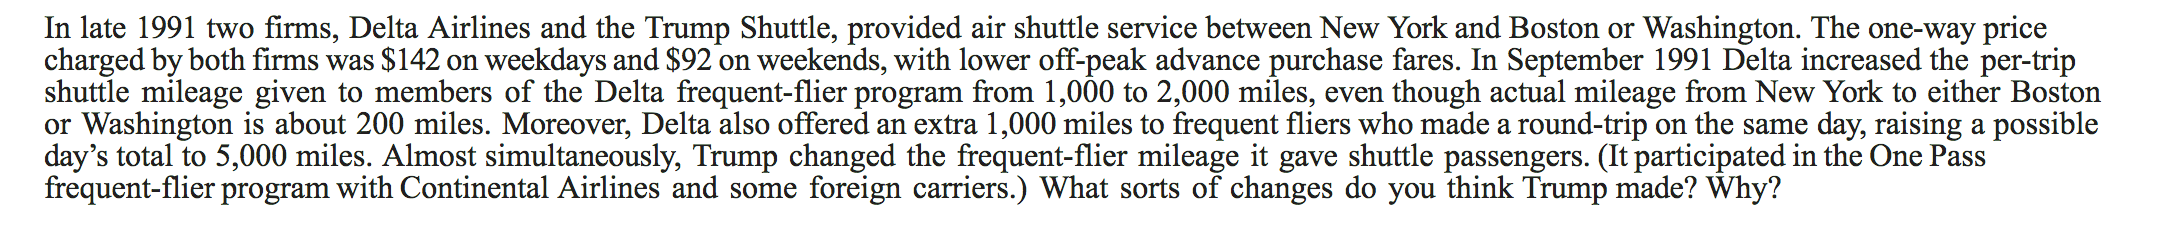 In late 1991 two firms, Delta Airlines and the Trump Shuttle, provided air shuttle service between New York and Boston or Washington. The one-way price
charged by both firms was $142 on
shuttle mileage given to members of the Delta frequent-flier program from 1,000 to 2,000 miles, even though actual mileage from New York to either Boston
or Washington is about 200 miles. Moreover, Delta also offered an extra 1,000 miles to frequent fliers who made a round-trip
day's total to 5,000 miles. Almost simultaneously, Trump changed the frequent-flier mileage it gave shuttle passengers. (It participated in the One Pass
frequent-flier program with Continental Airlines and some
weekdays and $92 on weekends, with lower off-peak advance purchase fares. In September 1991 Delta increased the per-trip
on the same day, raising a possible
foreign carriers.) What sorts of changes do you think Trump made? Why?
